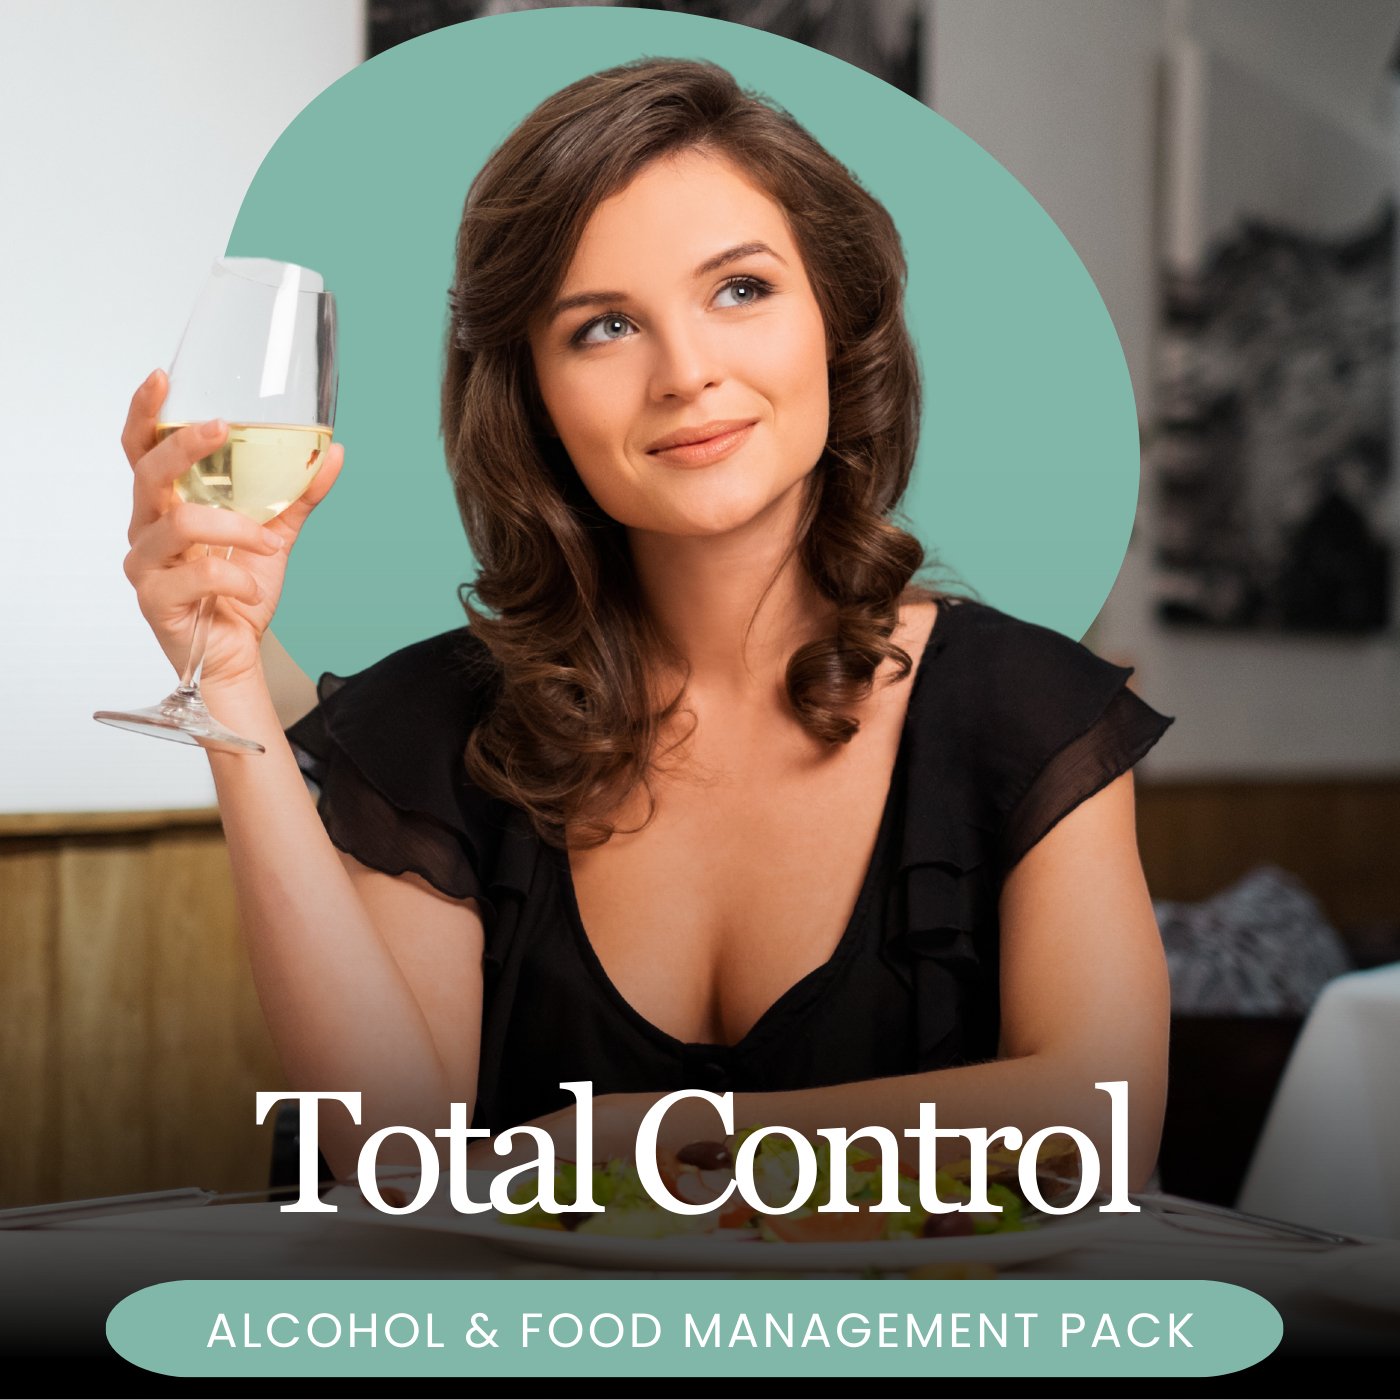 Control Alcohol Consumption Hypnotherapy - Clearmindshypnotherapy